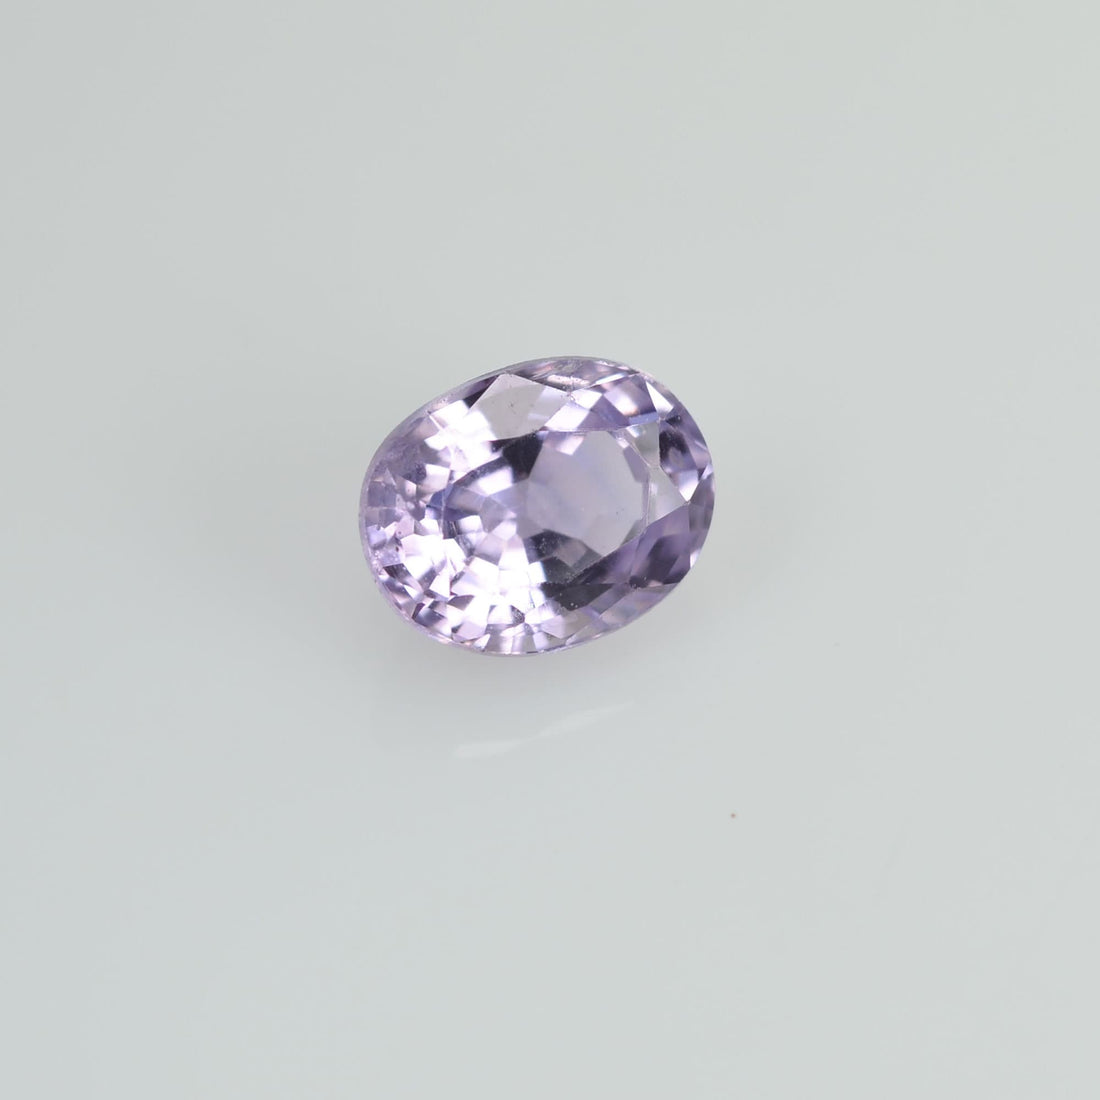 0.40 cts Natural Purple Sapphire Loose Gemstone Oval Cut